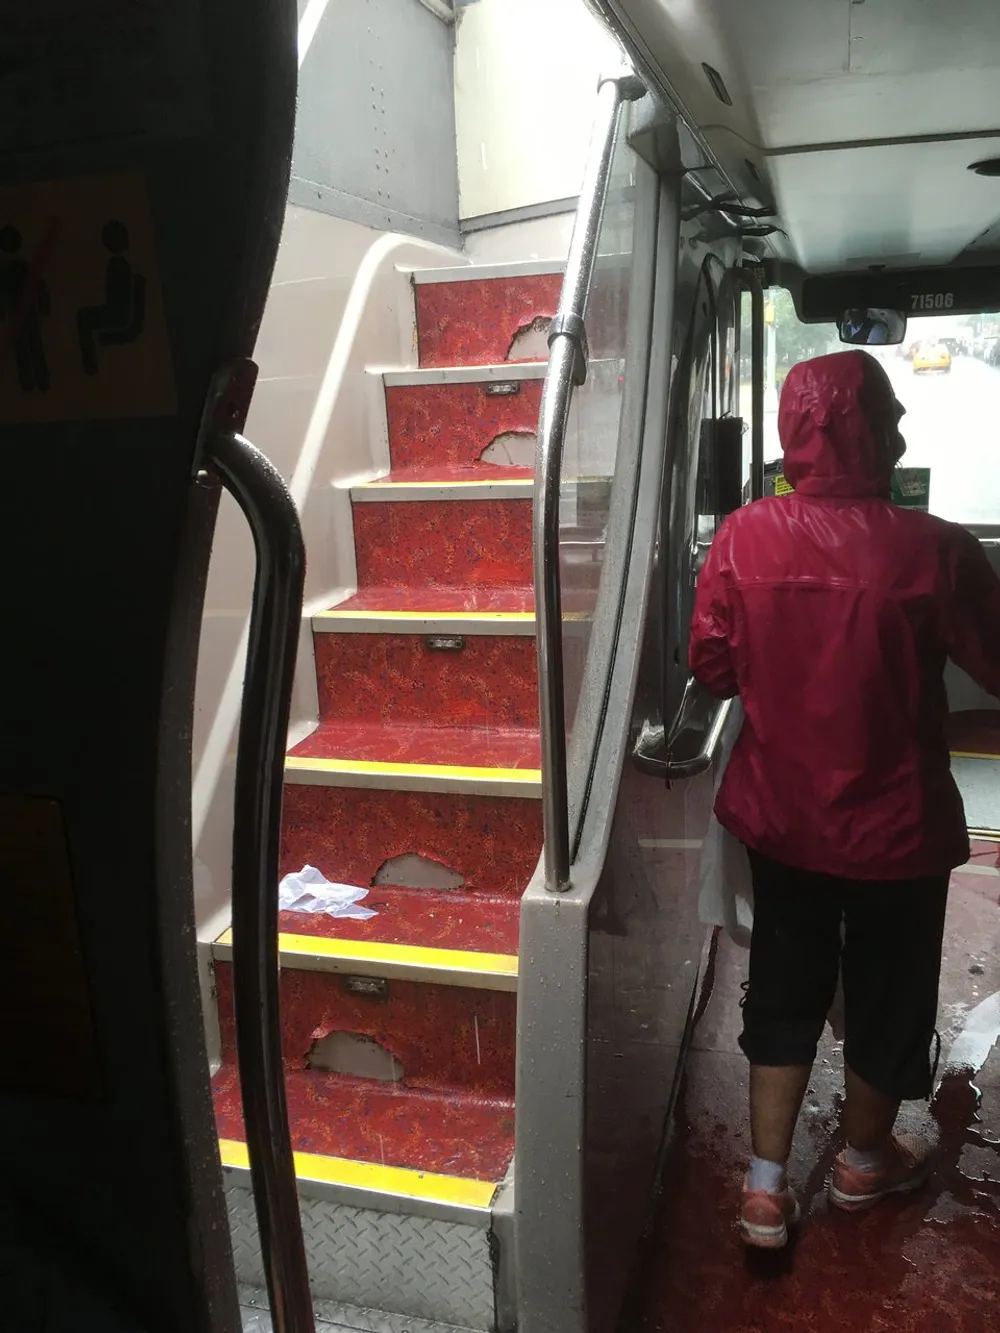 A person in a red raincoat is standing at the open door of a bus which shows a set of stairs leading to the street on a wet and possibly rainy day